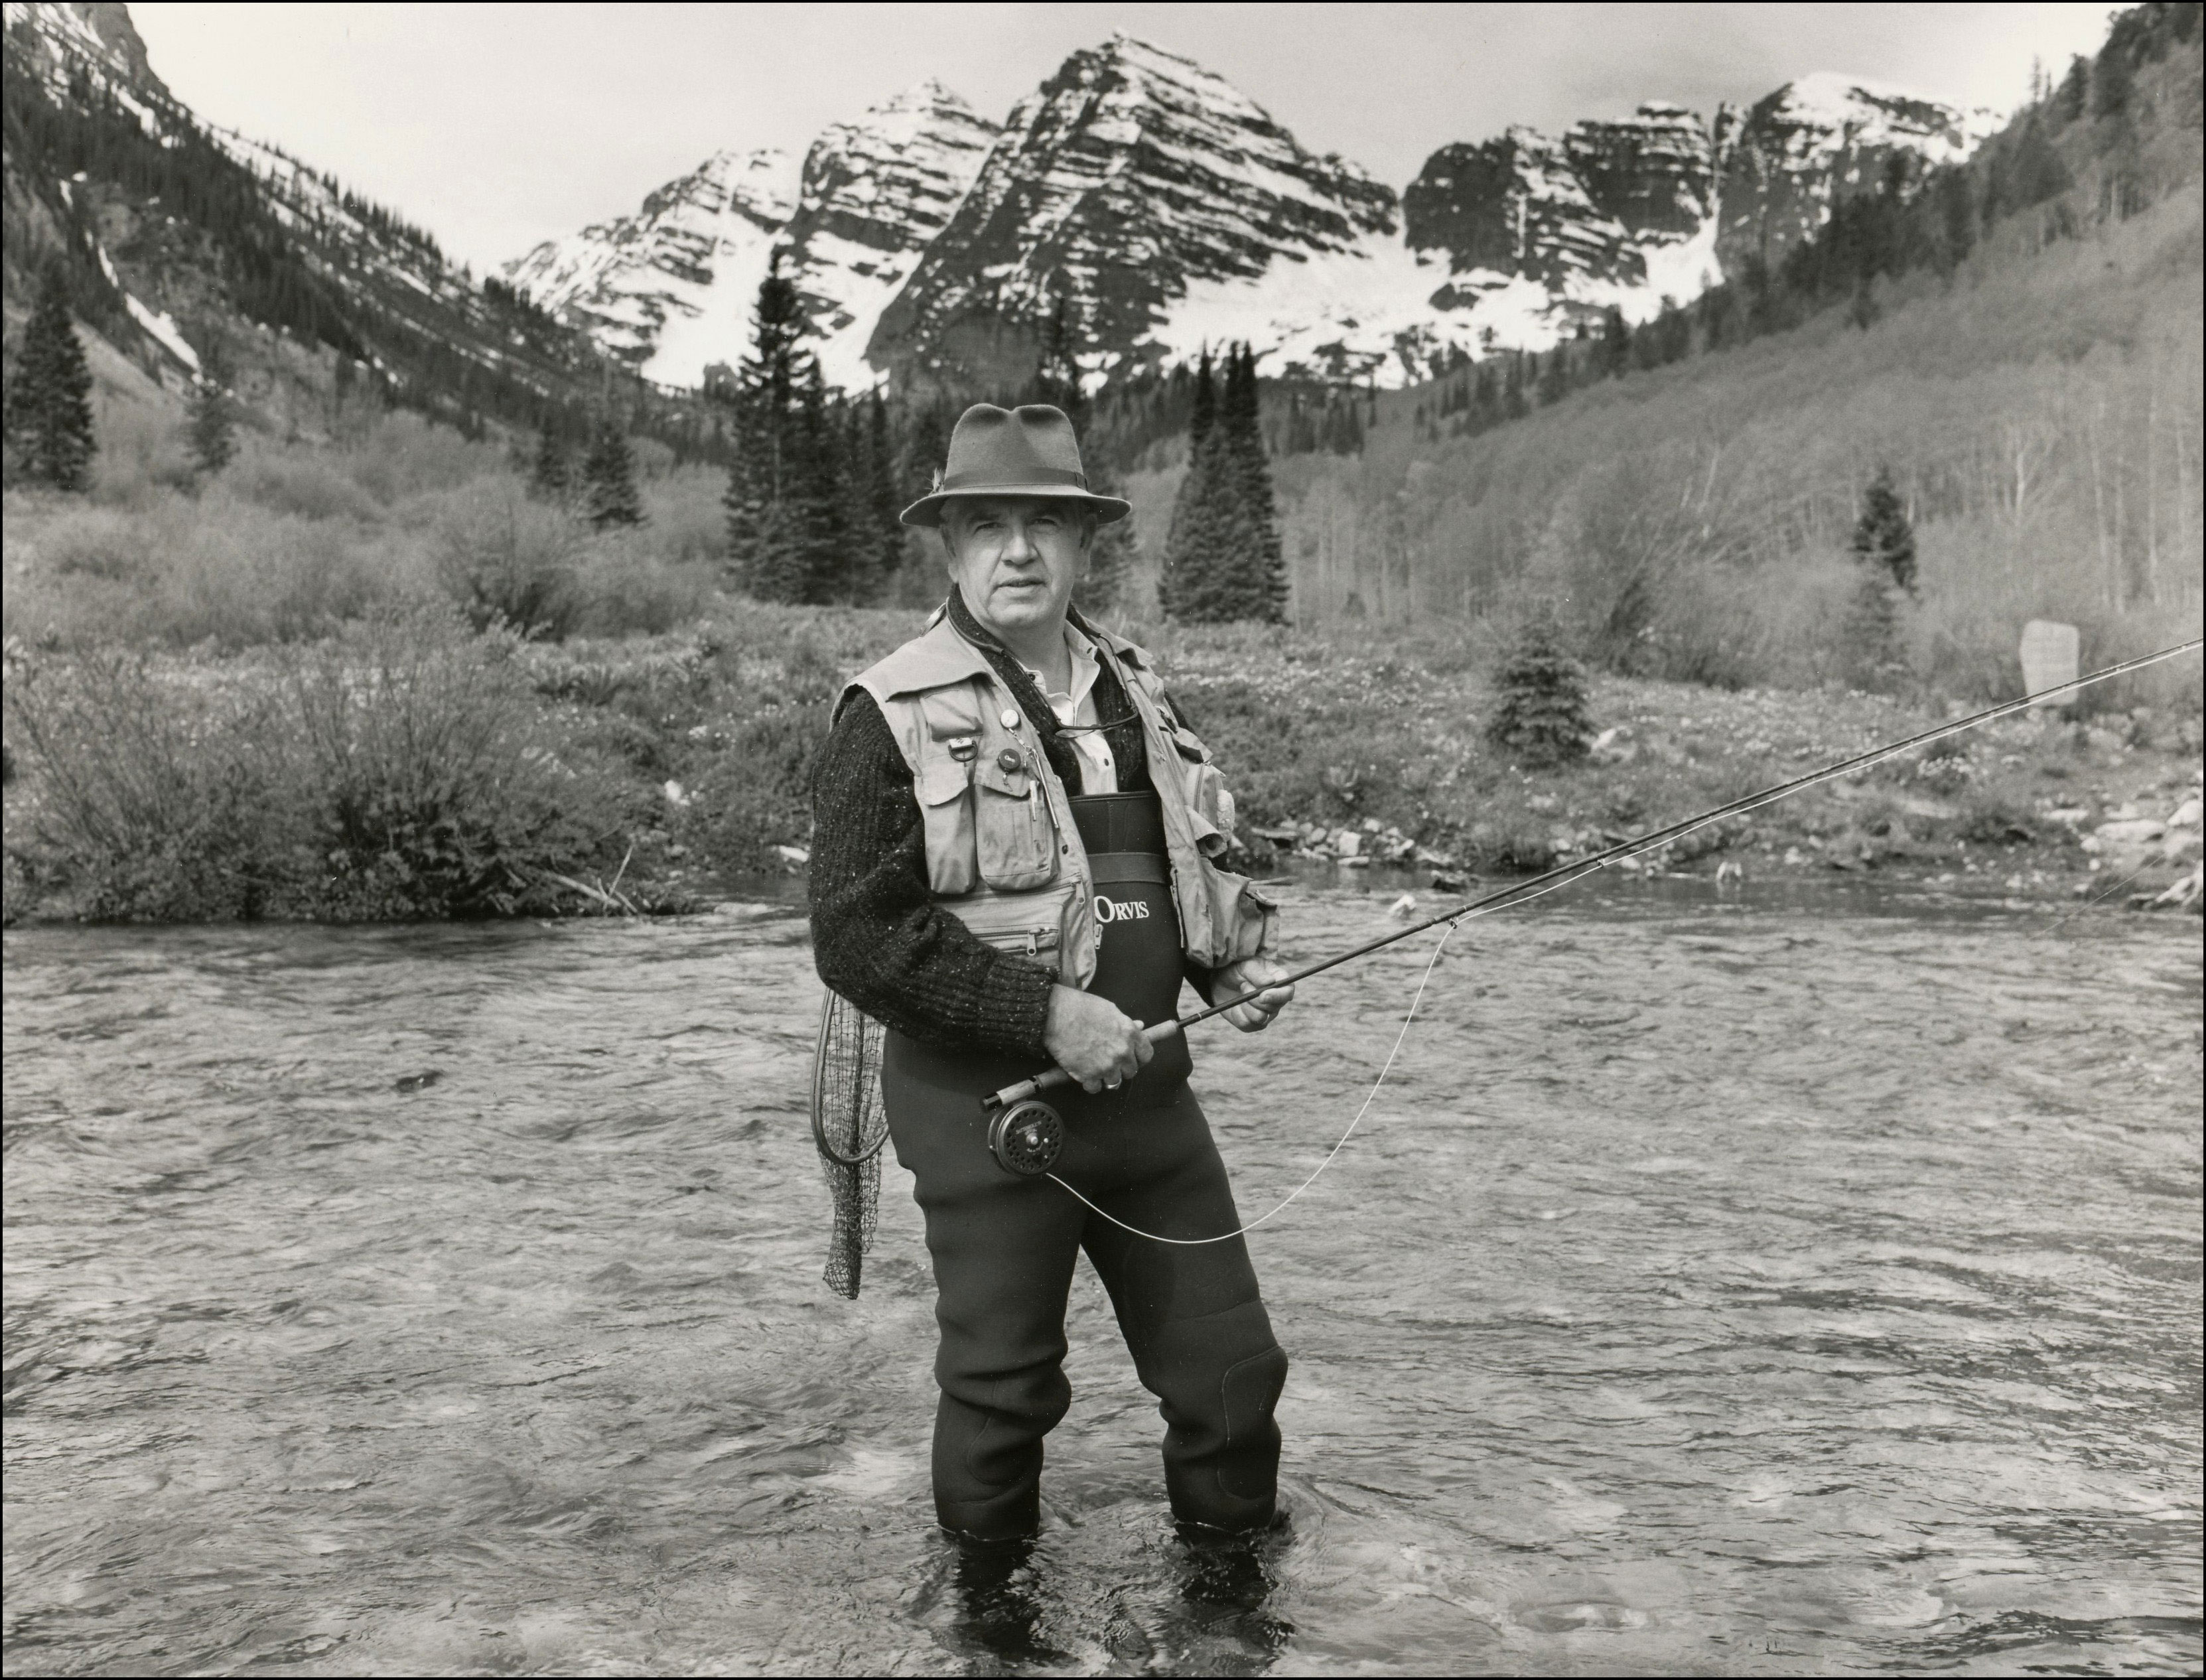 Fisherman with hat, vest and waders standing in river with fly rod. Rugged mountain peaks with snow in the background.